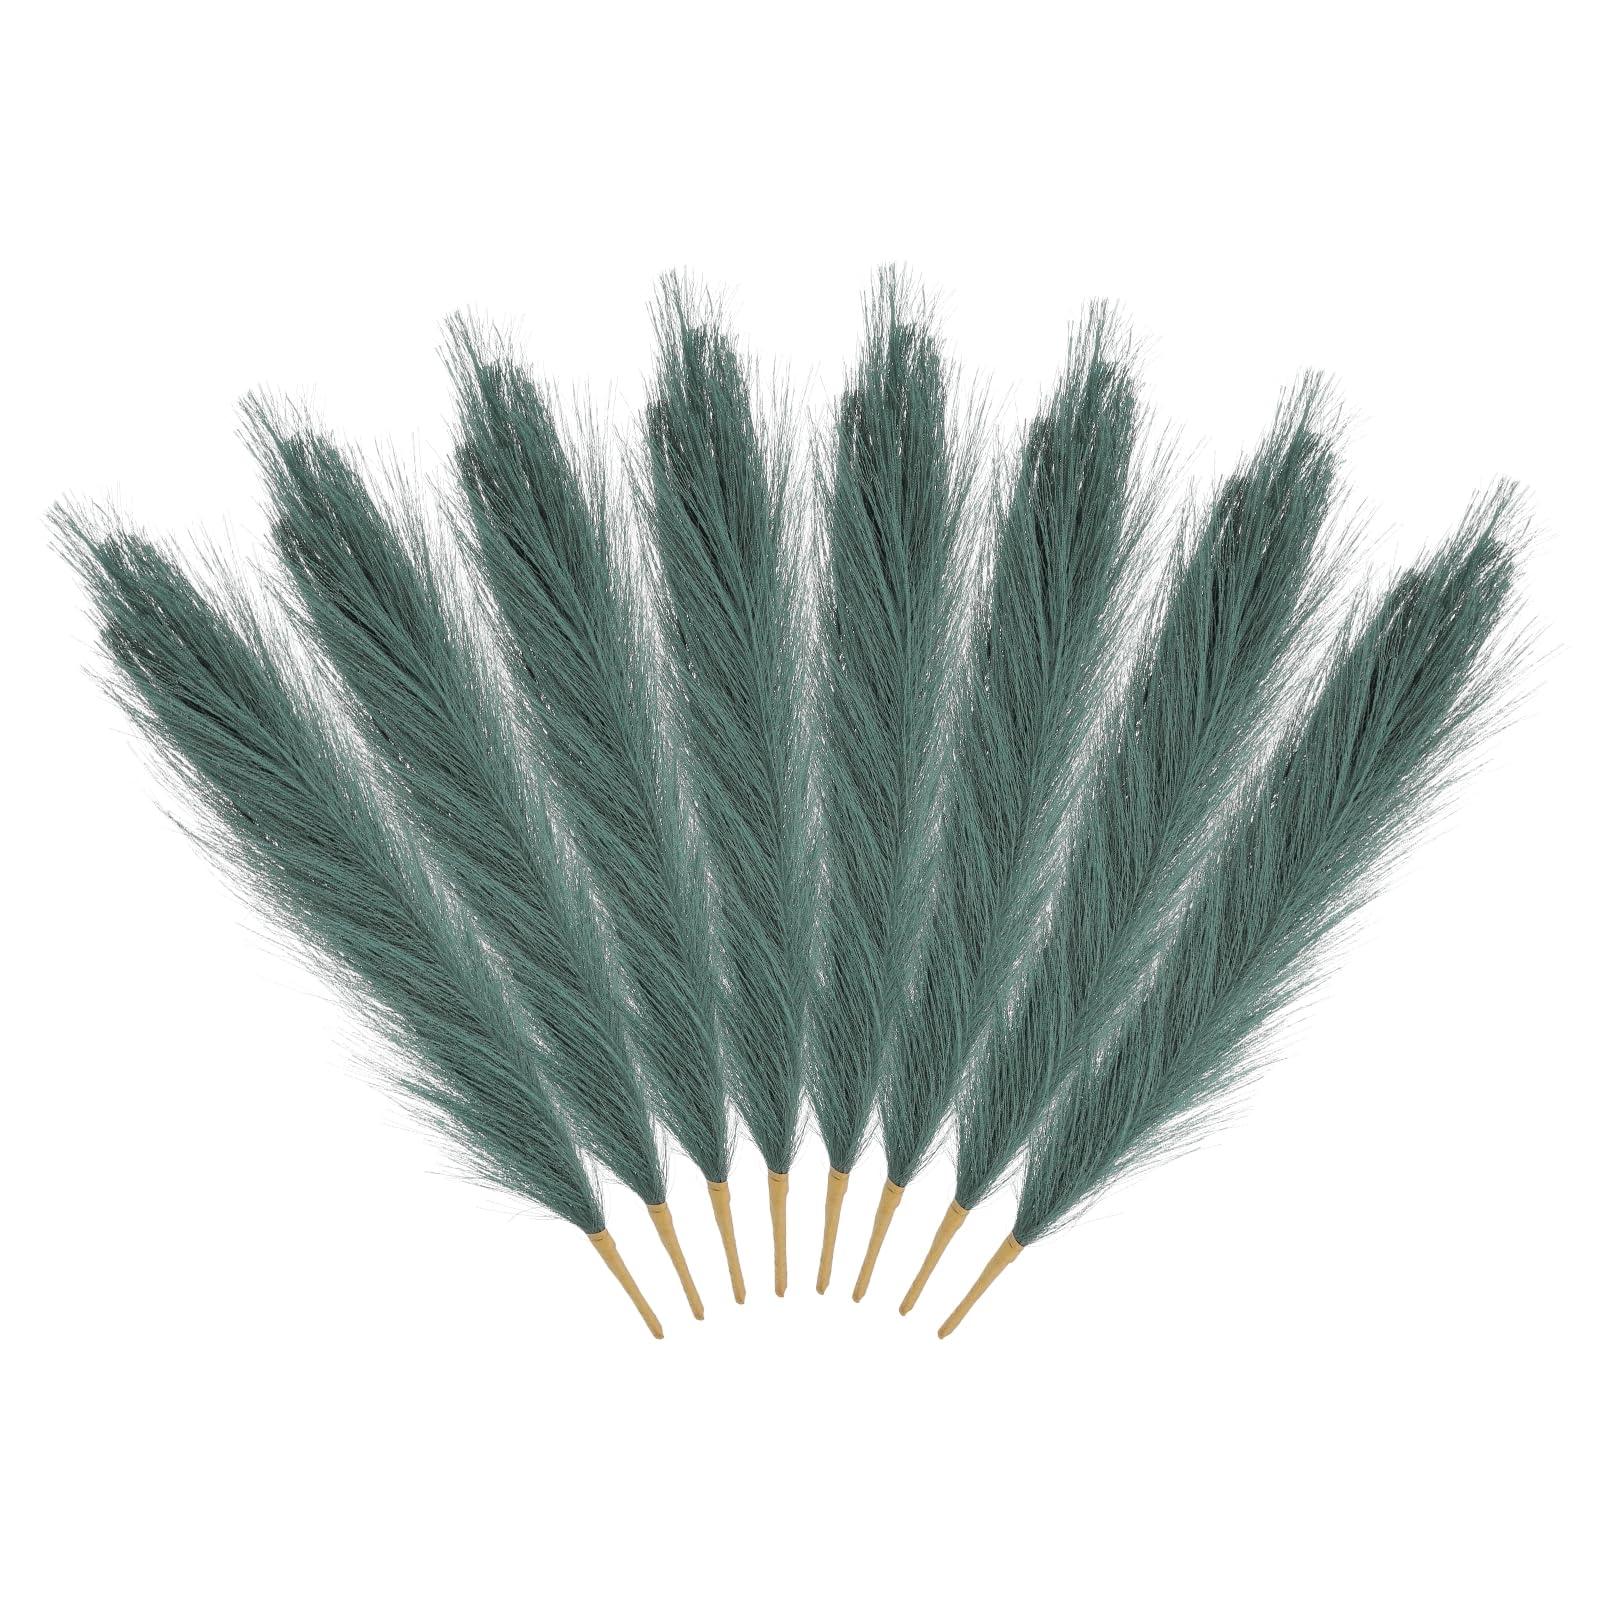 sourcing map 8Pcs Pampas Faux Grass,Tall 17.7"/45cm Fake Fluffy Pampas Grass Decor for Living Room Party Wall Vase Wedding Decoration,Dark Green